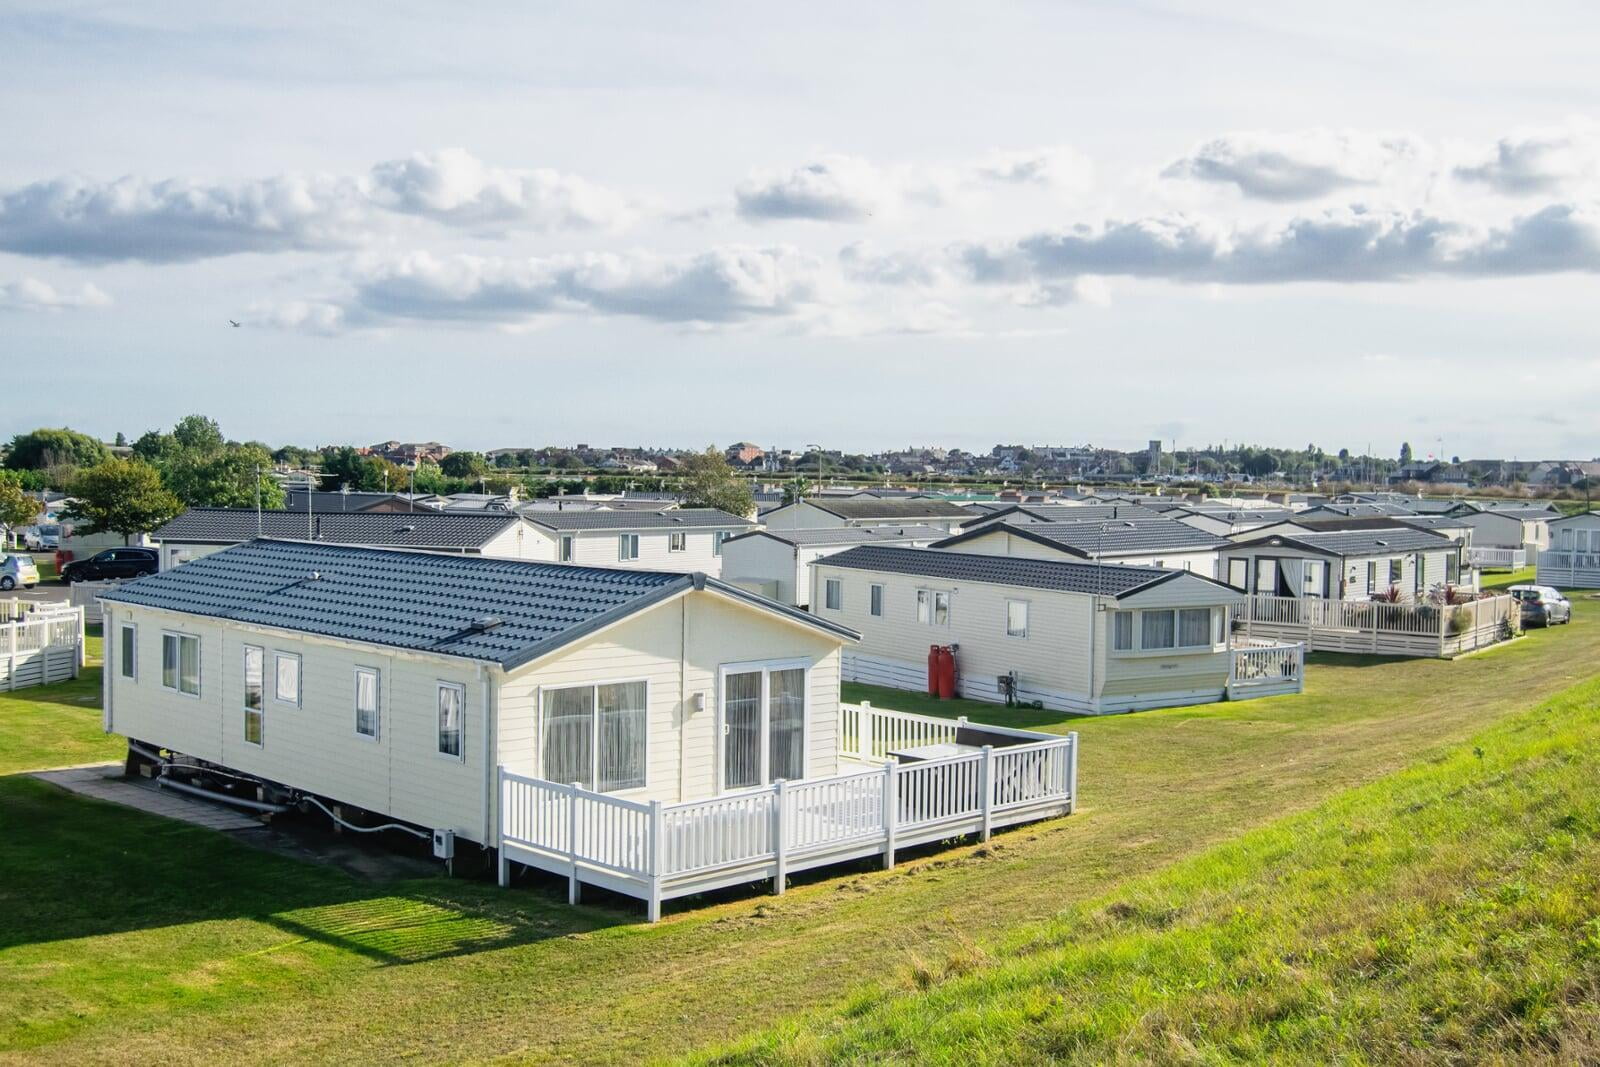 Trailer Parks Emerging As An Answer To Low-Income Housing Crisis